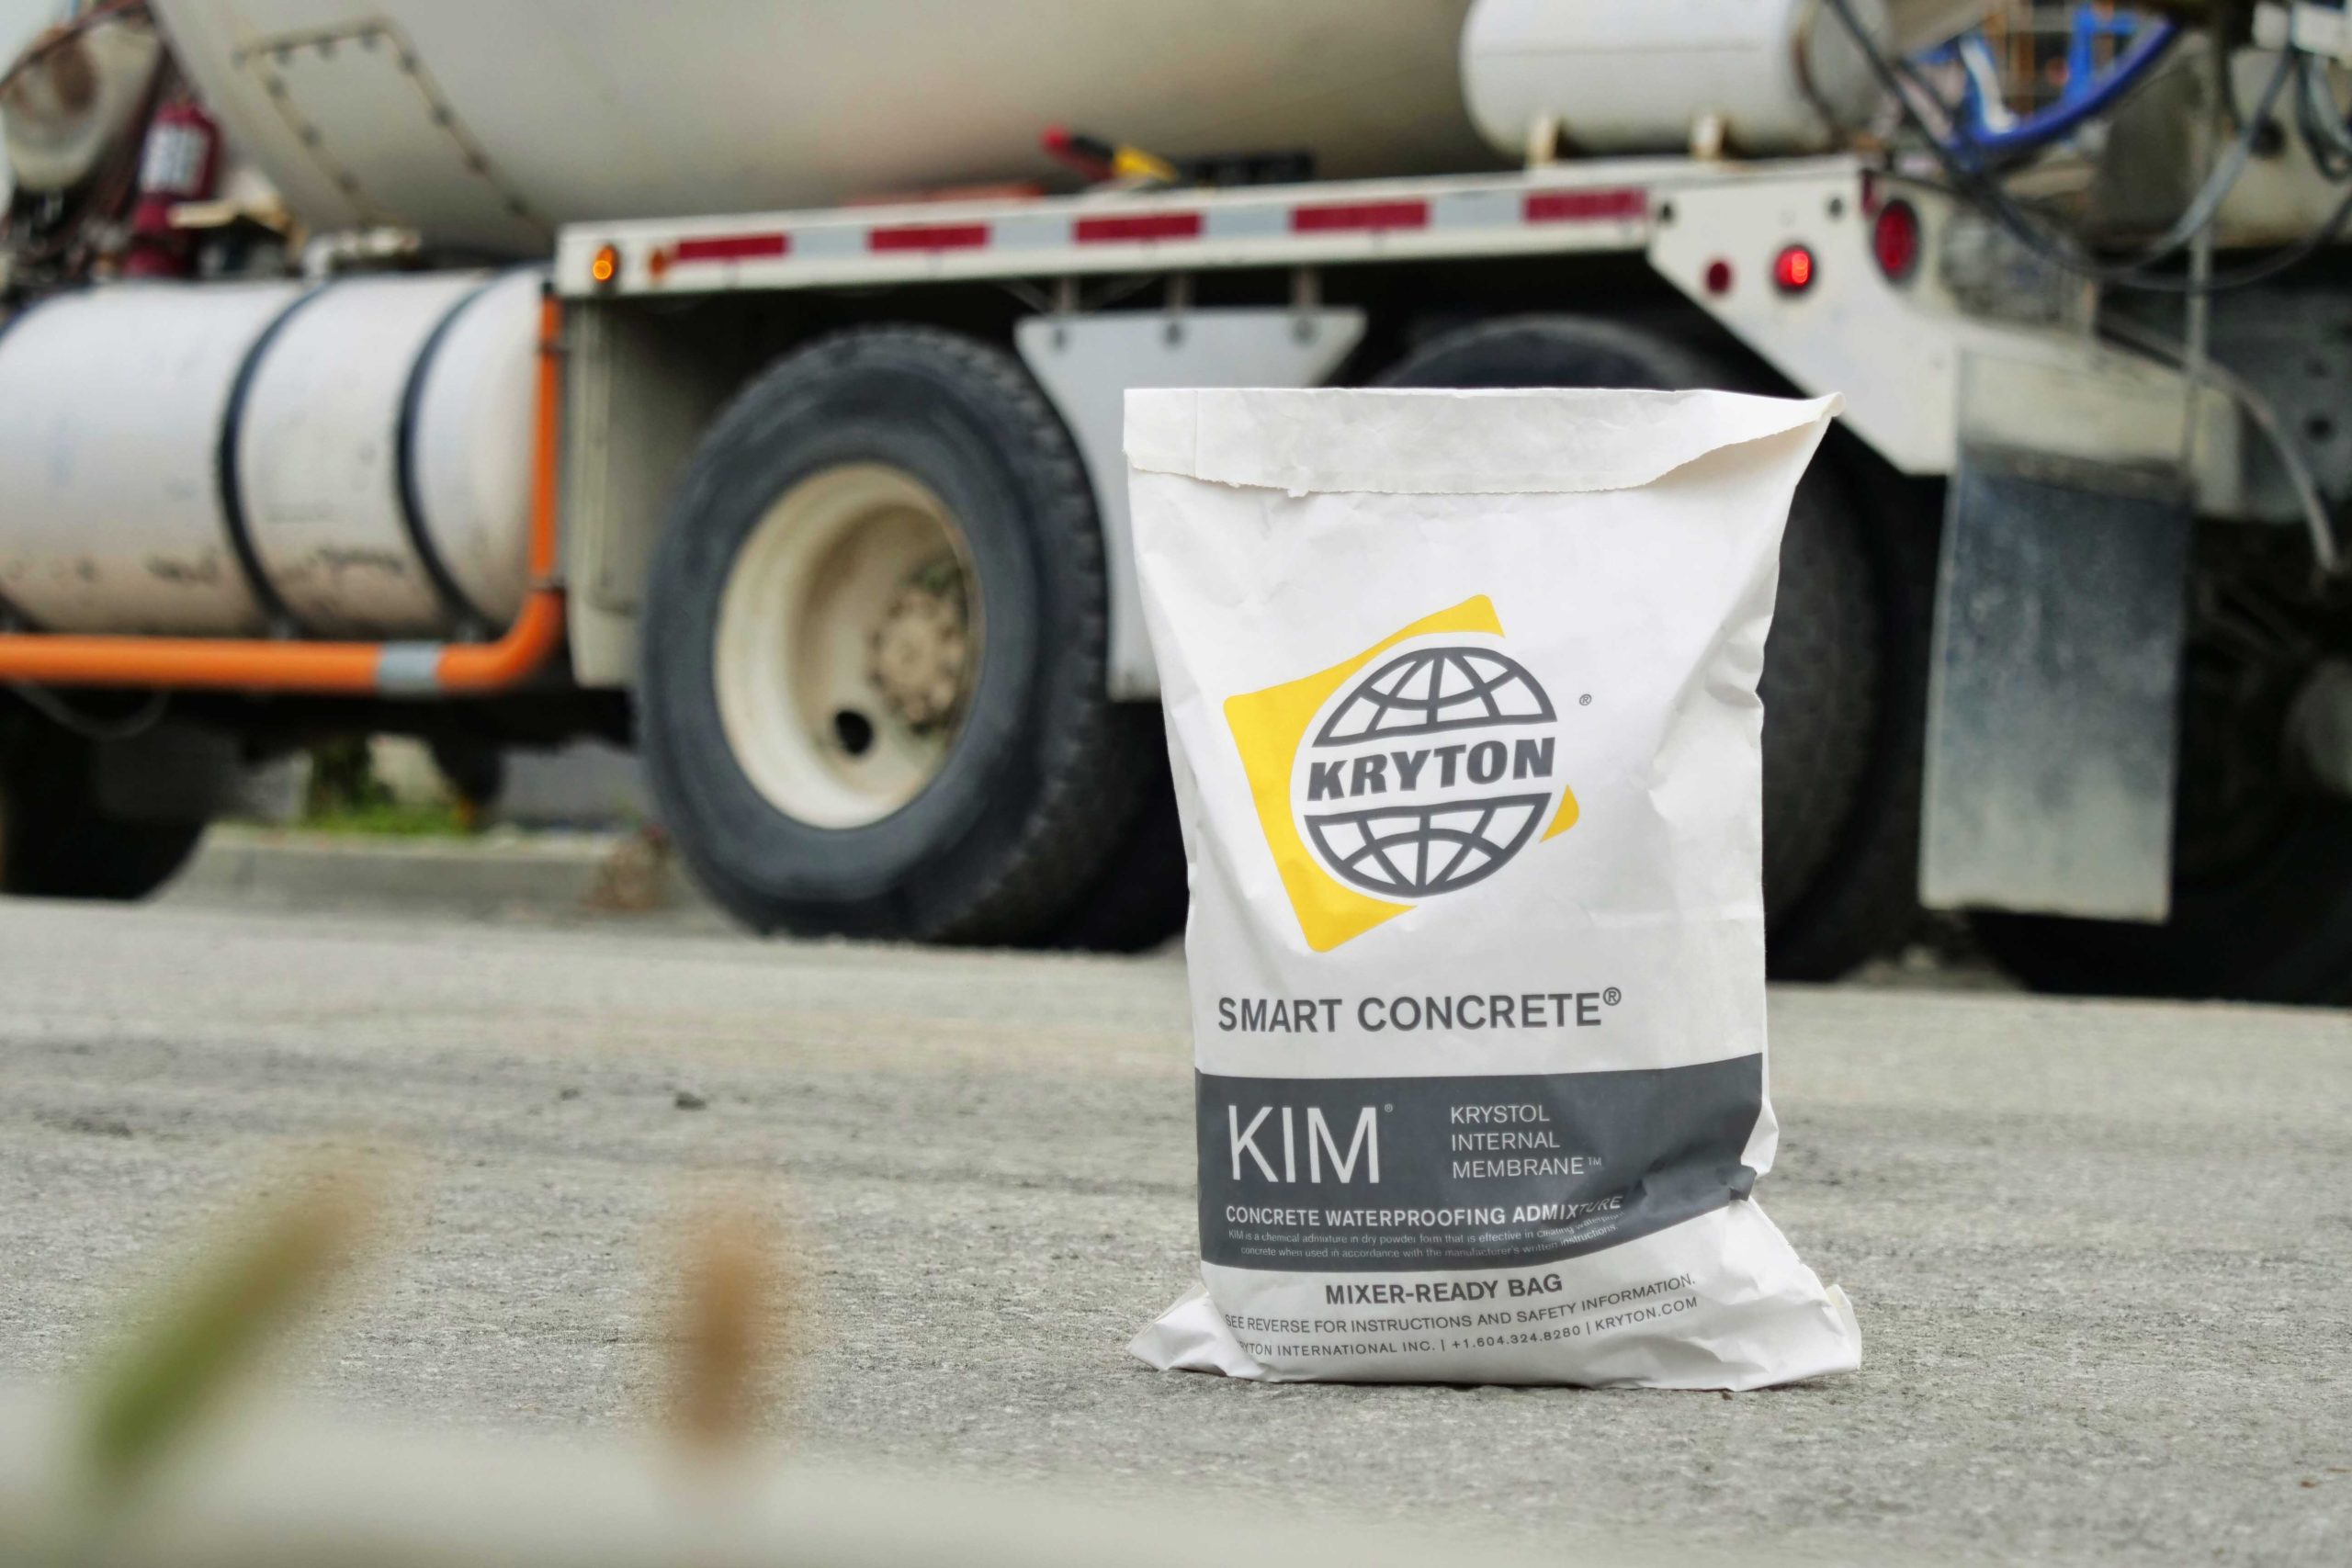 A dissoluble bag of KIM is sitting on pavement ahead of a ready-mix truck that's parked off to the side.